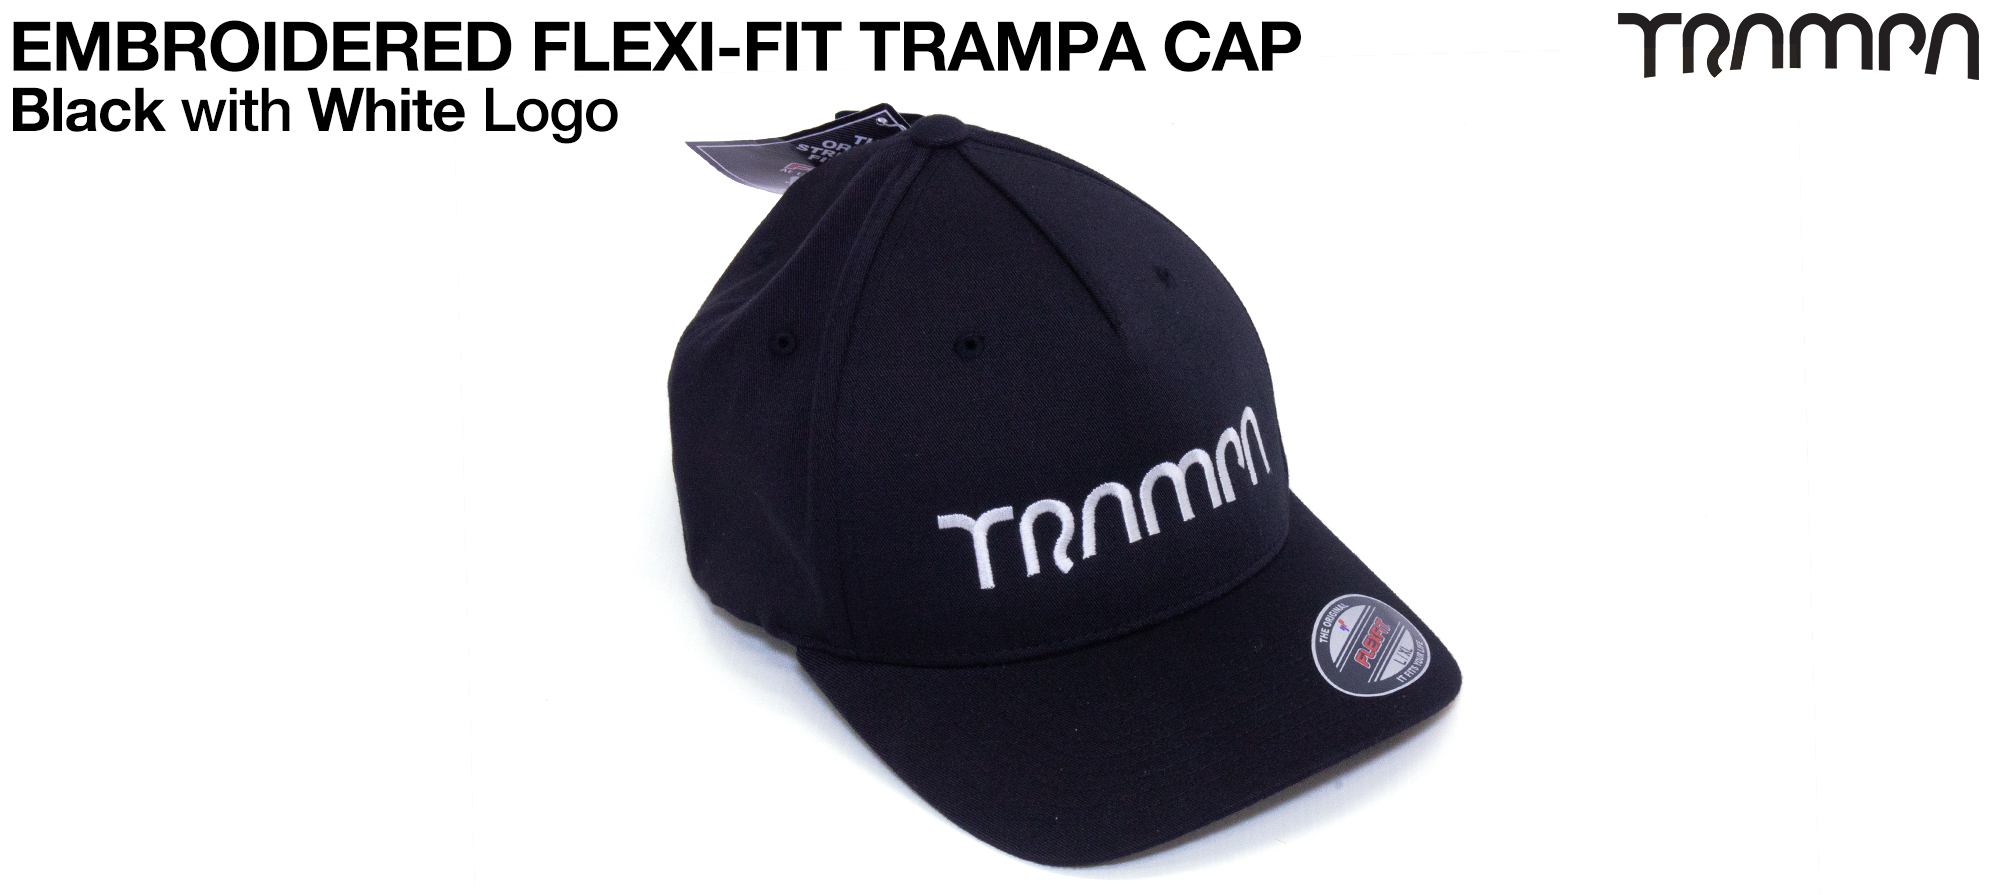 BLACK with WHITE Embroidered TRAMPA logo 5 Panel FLEXI-FIT Cap - LARGE / X-LARGE